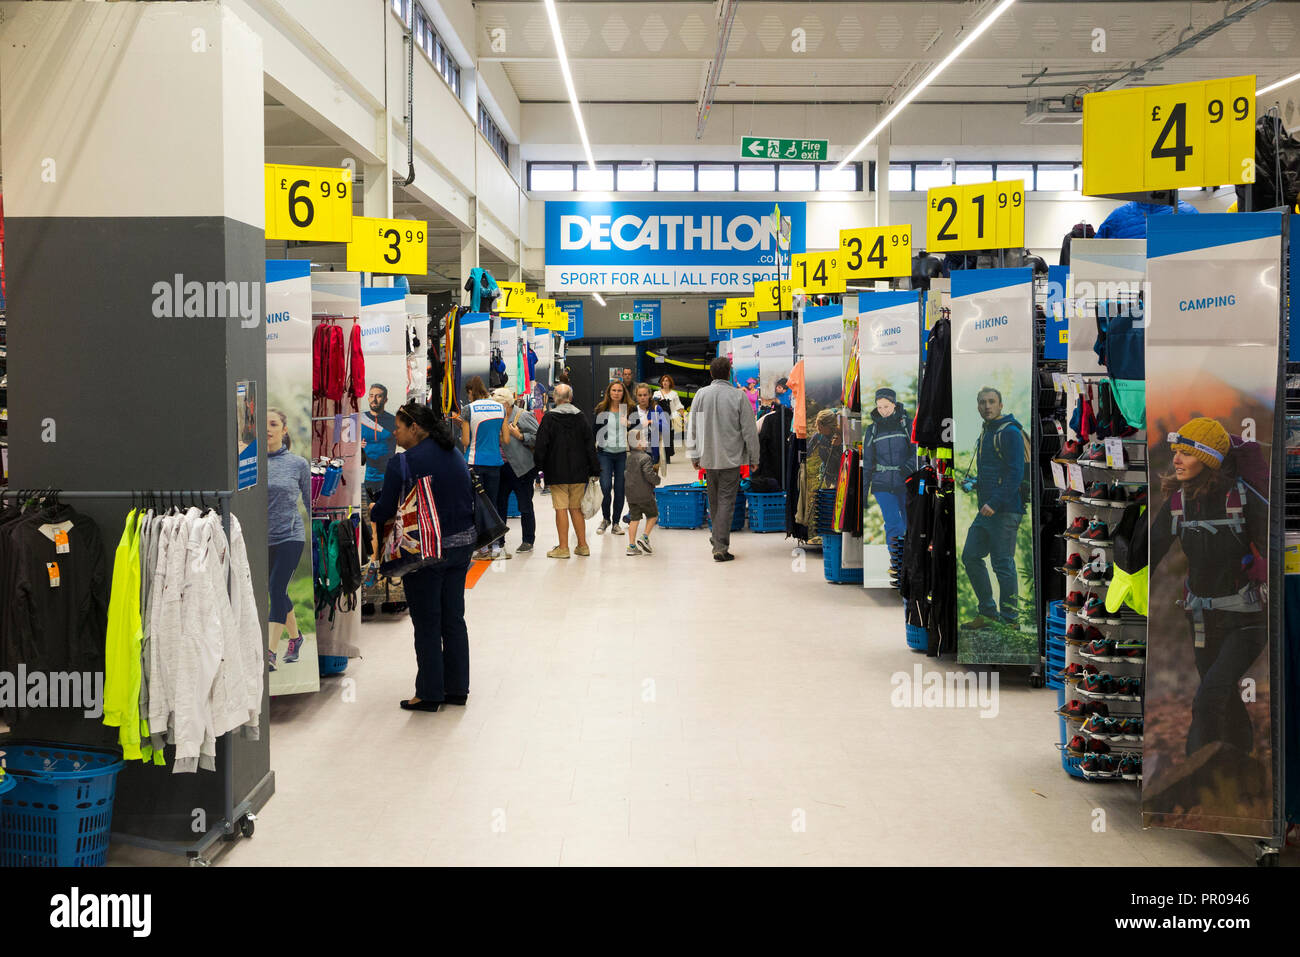 decathlon factory outlet